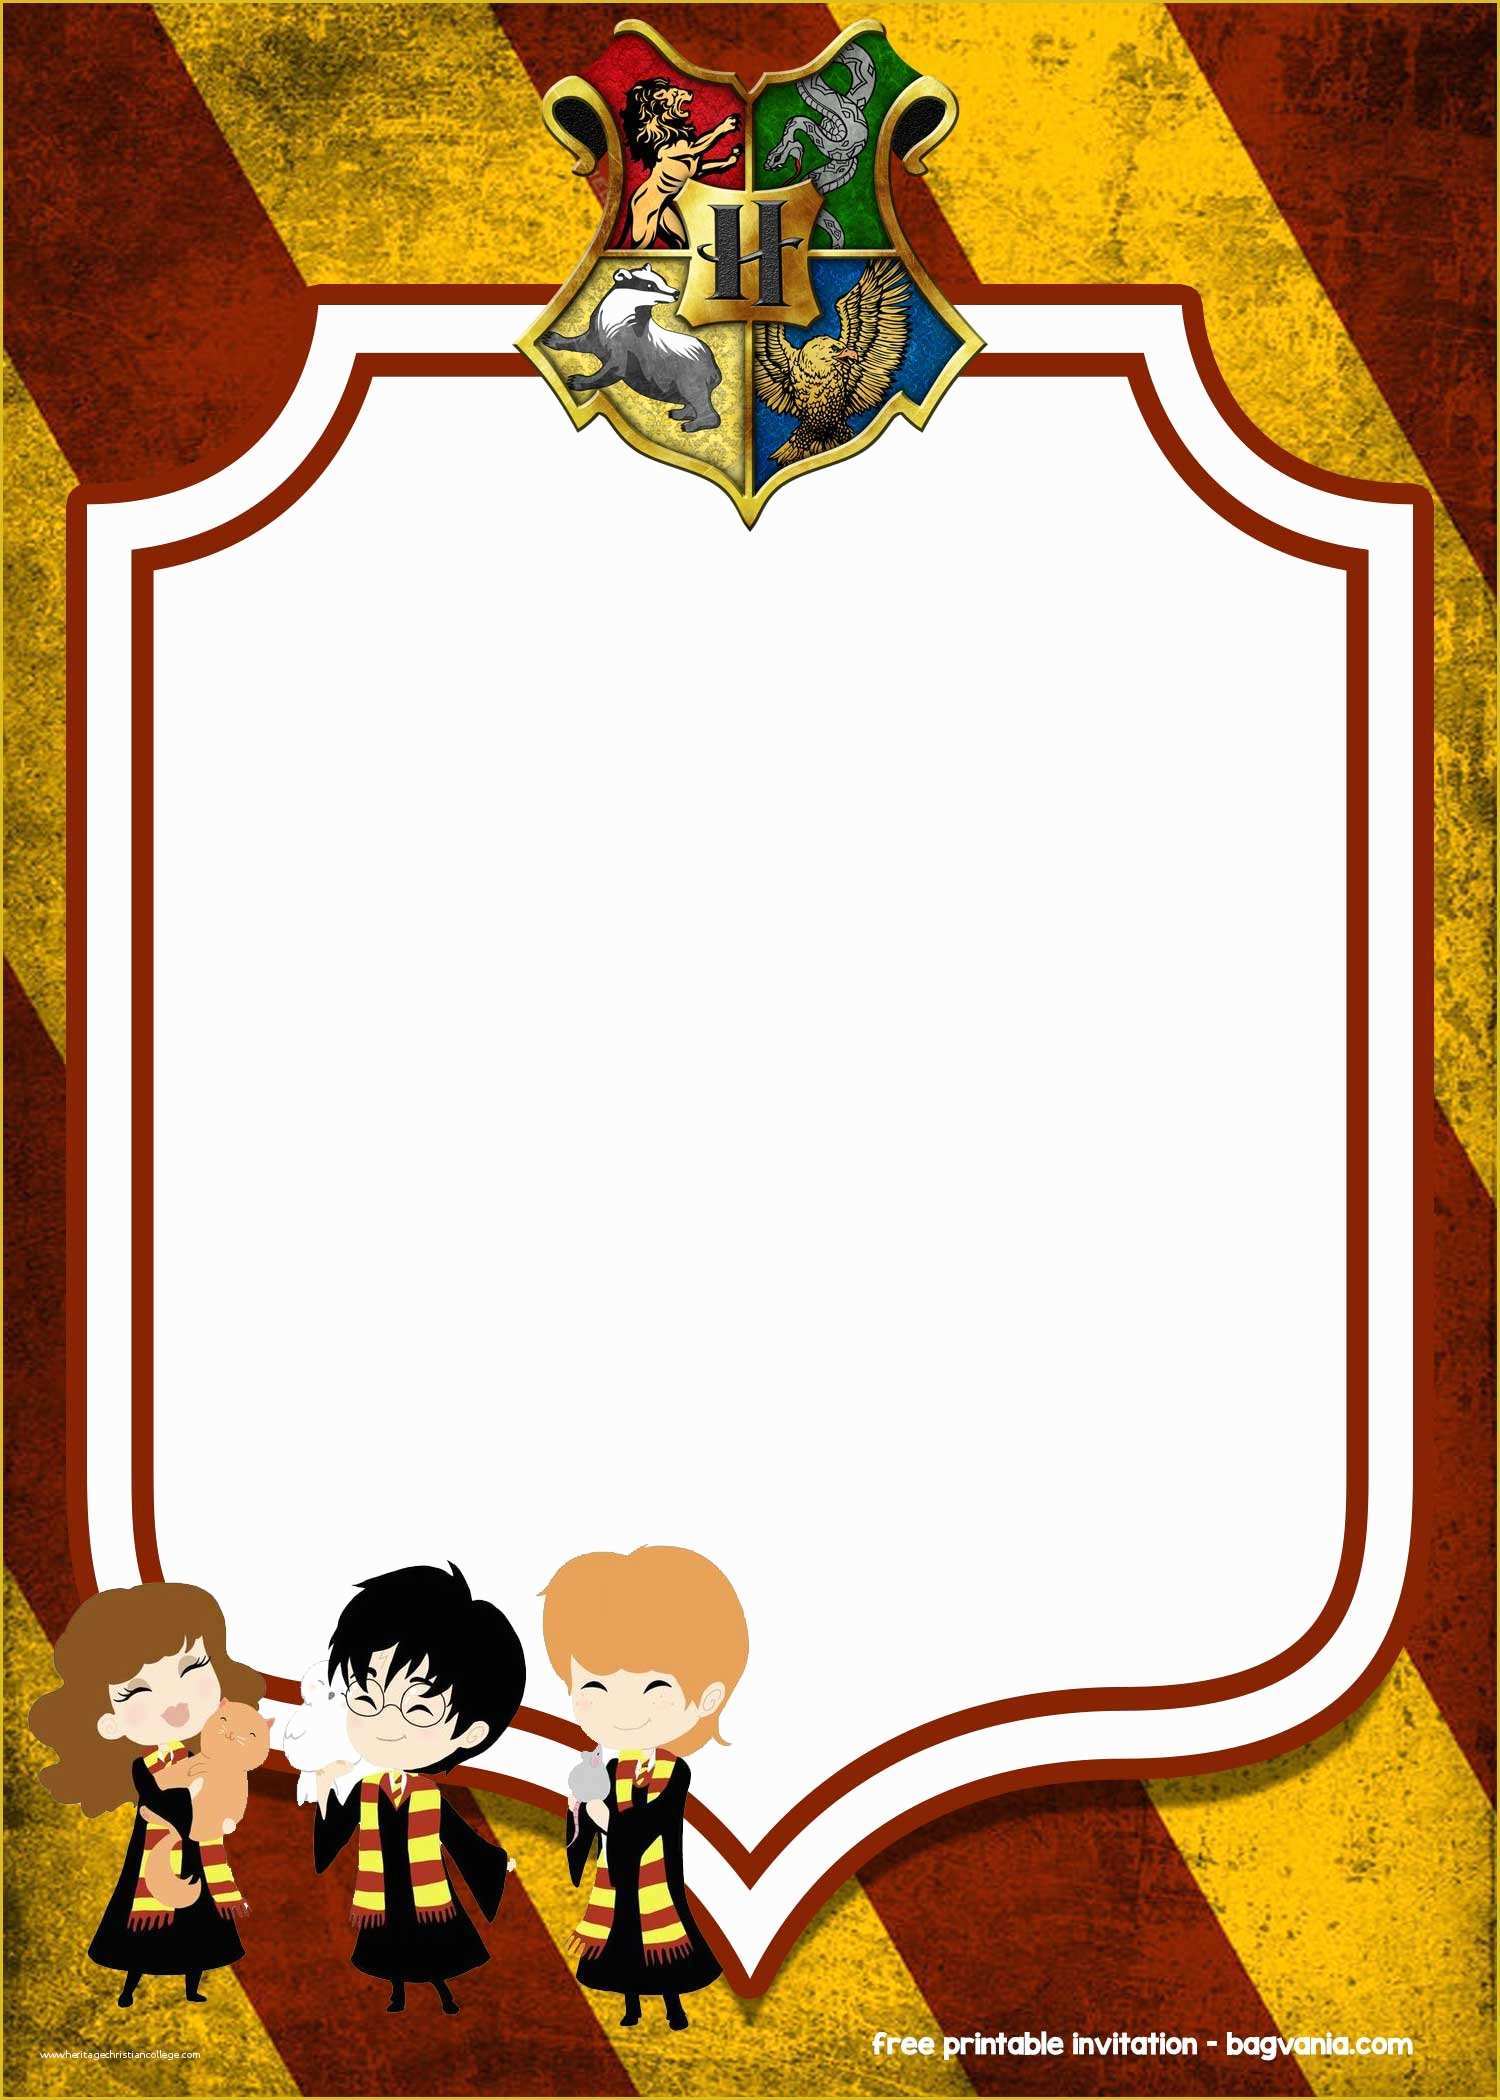 Harry Potter Invitation Template Free Of Free Printable Harry Potter Invitation Templates – Free